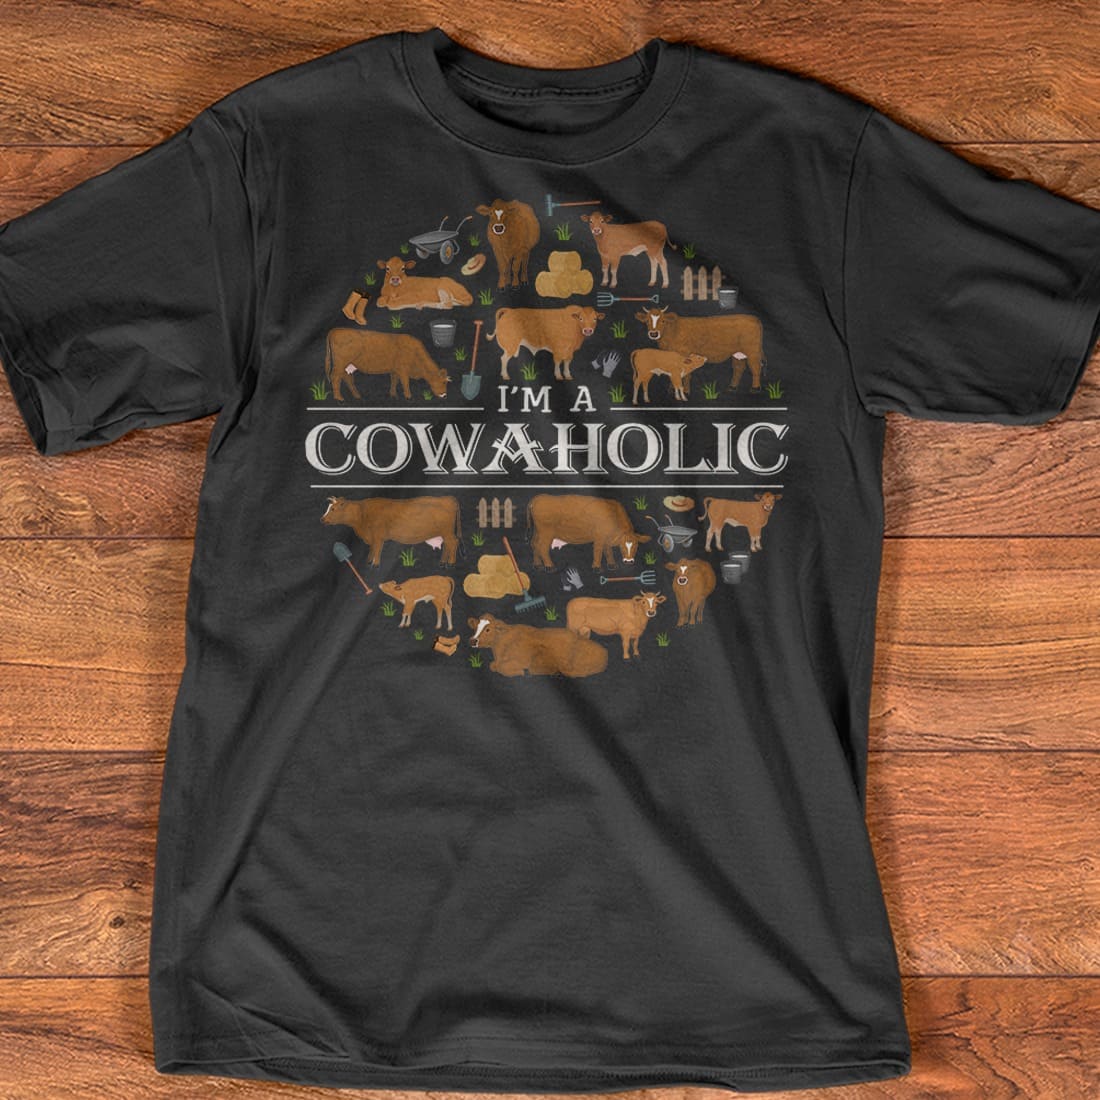 I'm a cowaholic - Gift for cow lover, cow the animal